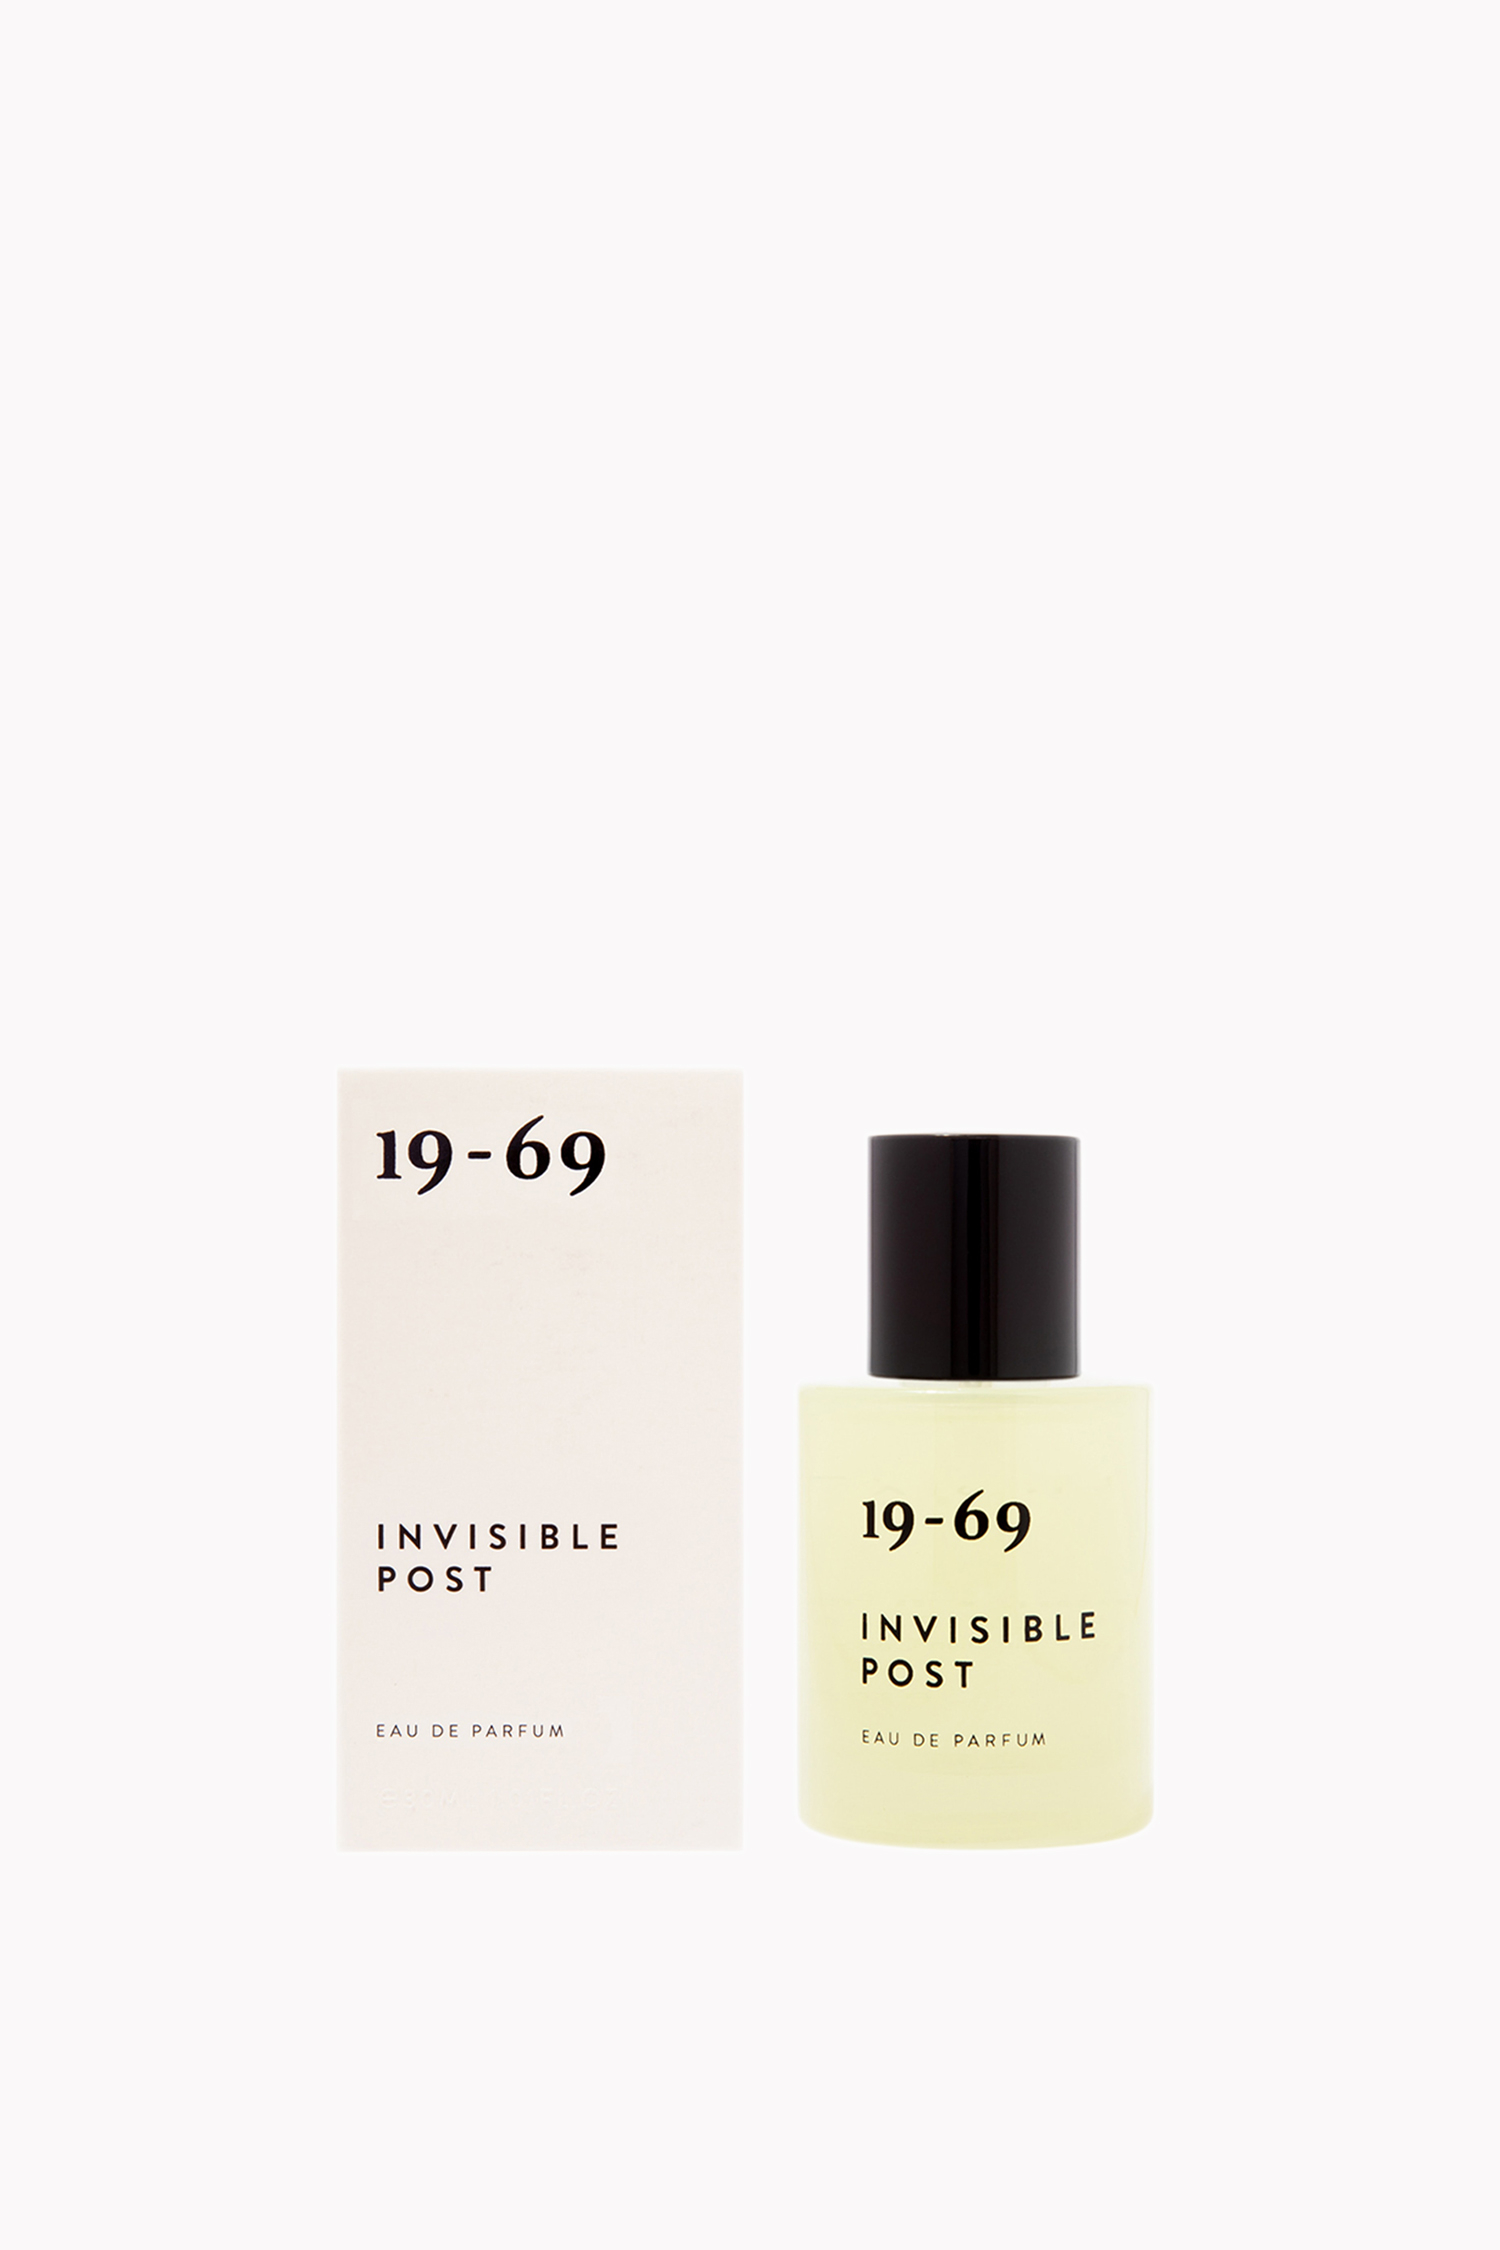 19-69 - Invisible Post, 30 ml - OOID Store, CHF 79.00